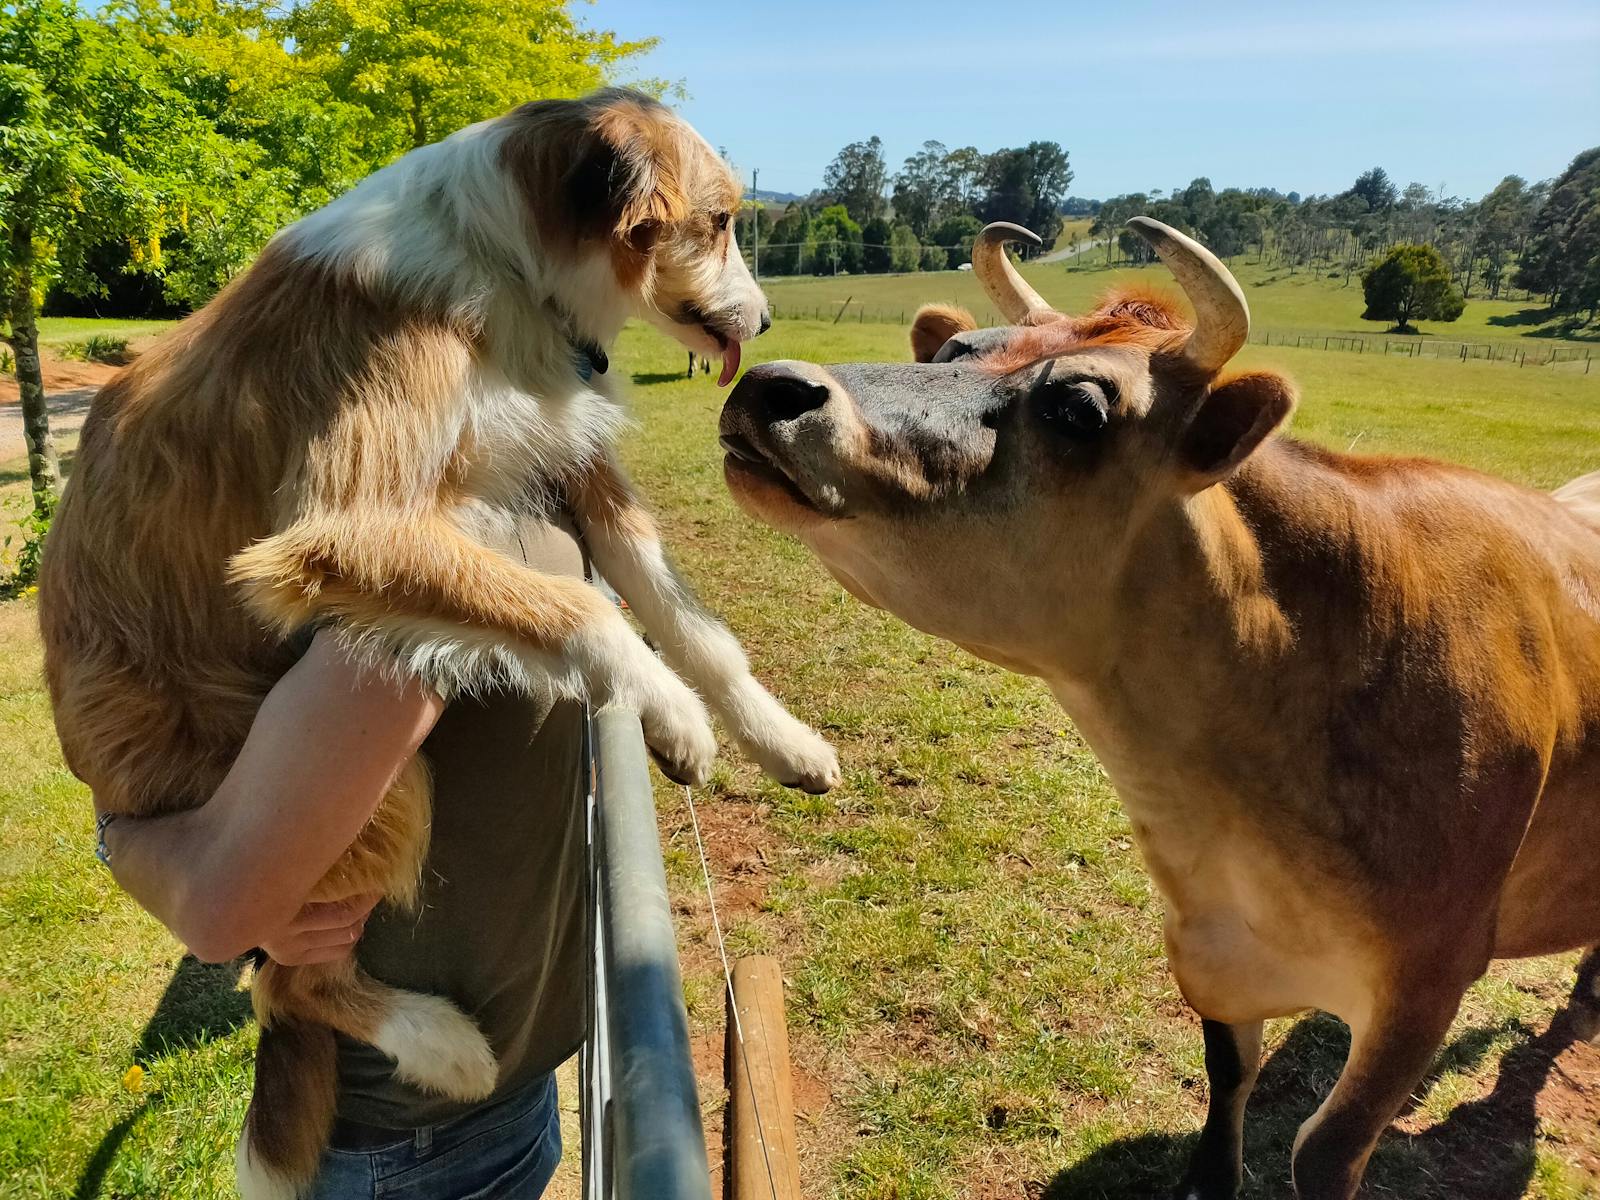 Some of our farm animals, Cody the truffle dog and Berta the Jersey cow